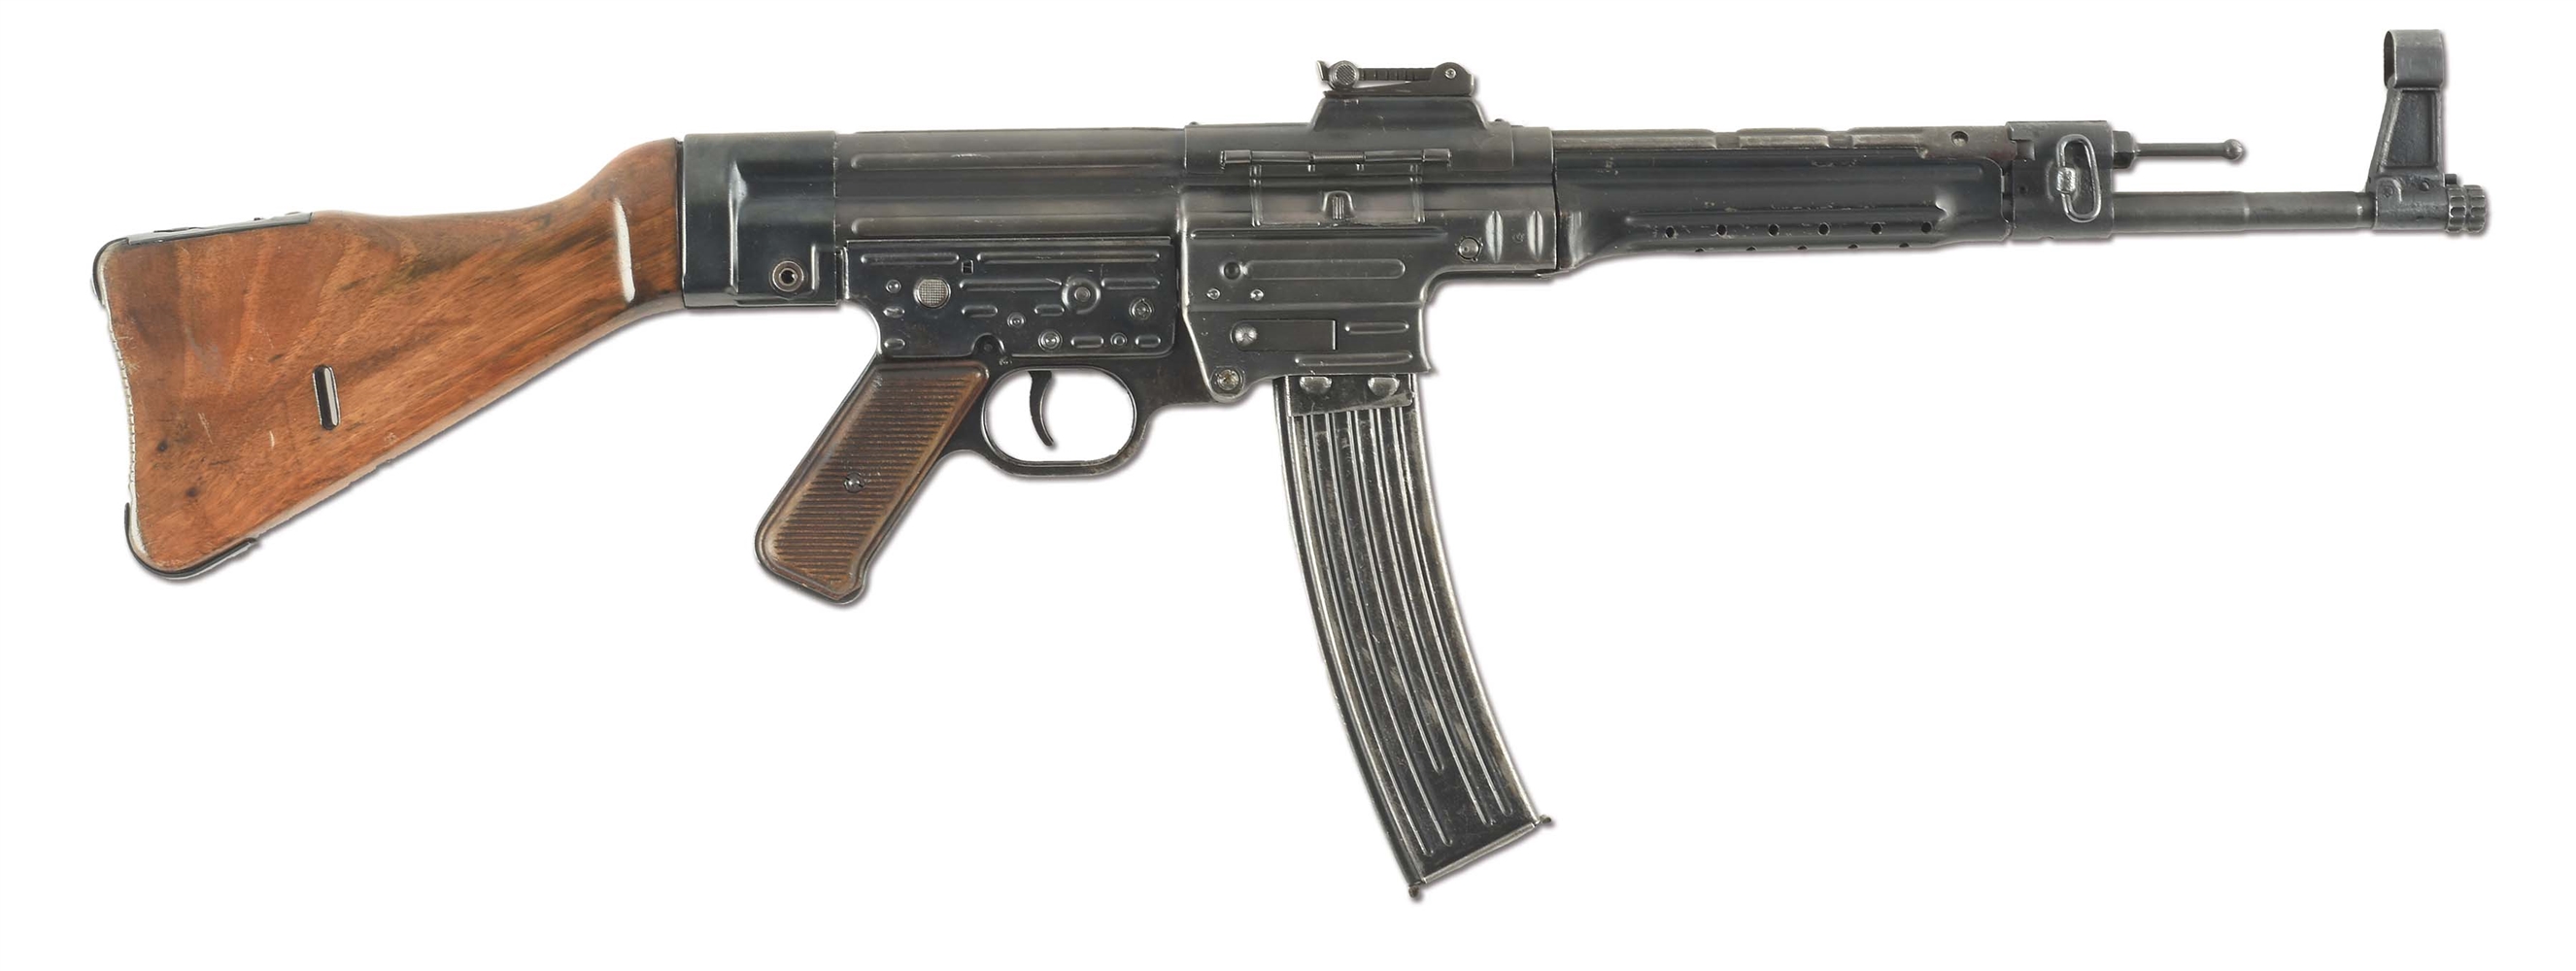 (N) HIGHLY DESIRABLE GERMAN MP-44 MACHINE GUN (CURIO AND RELIC).